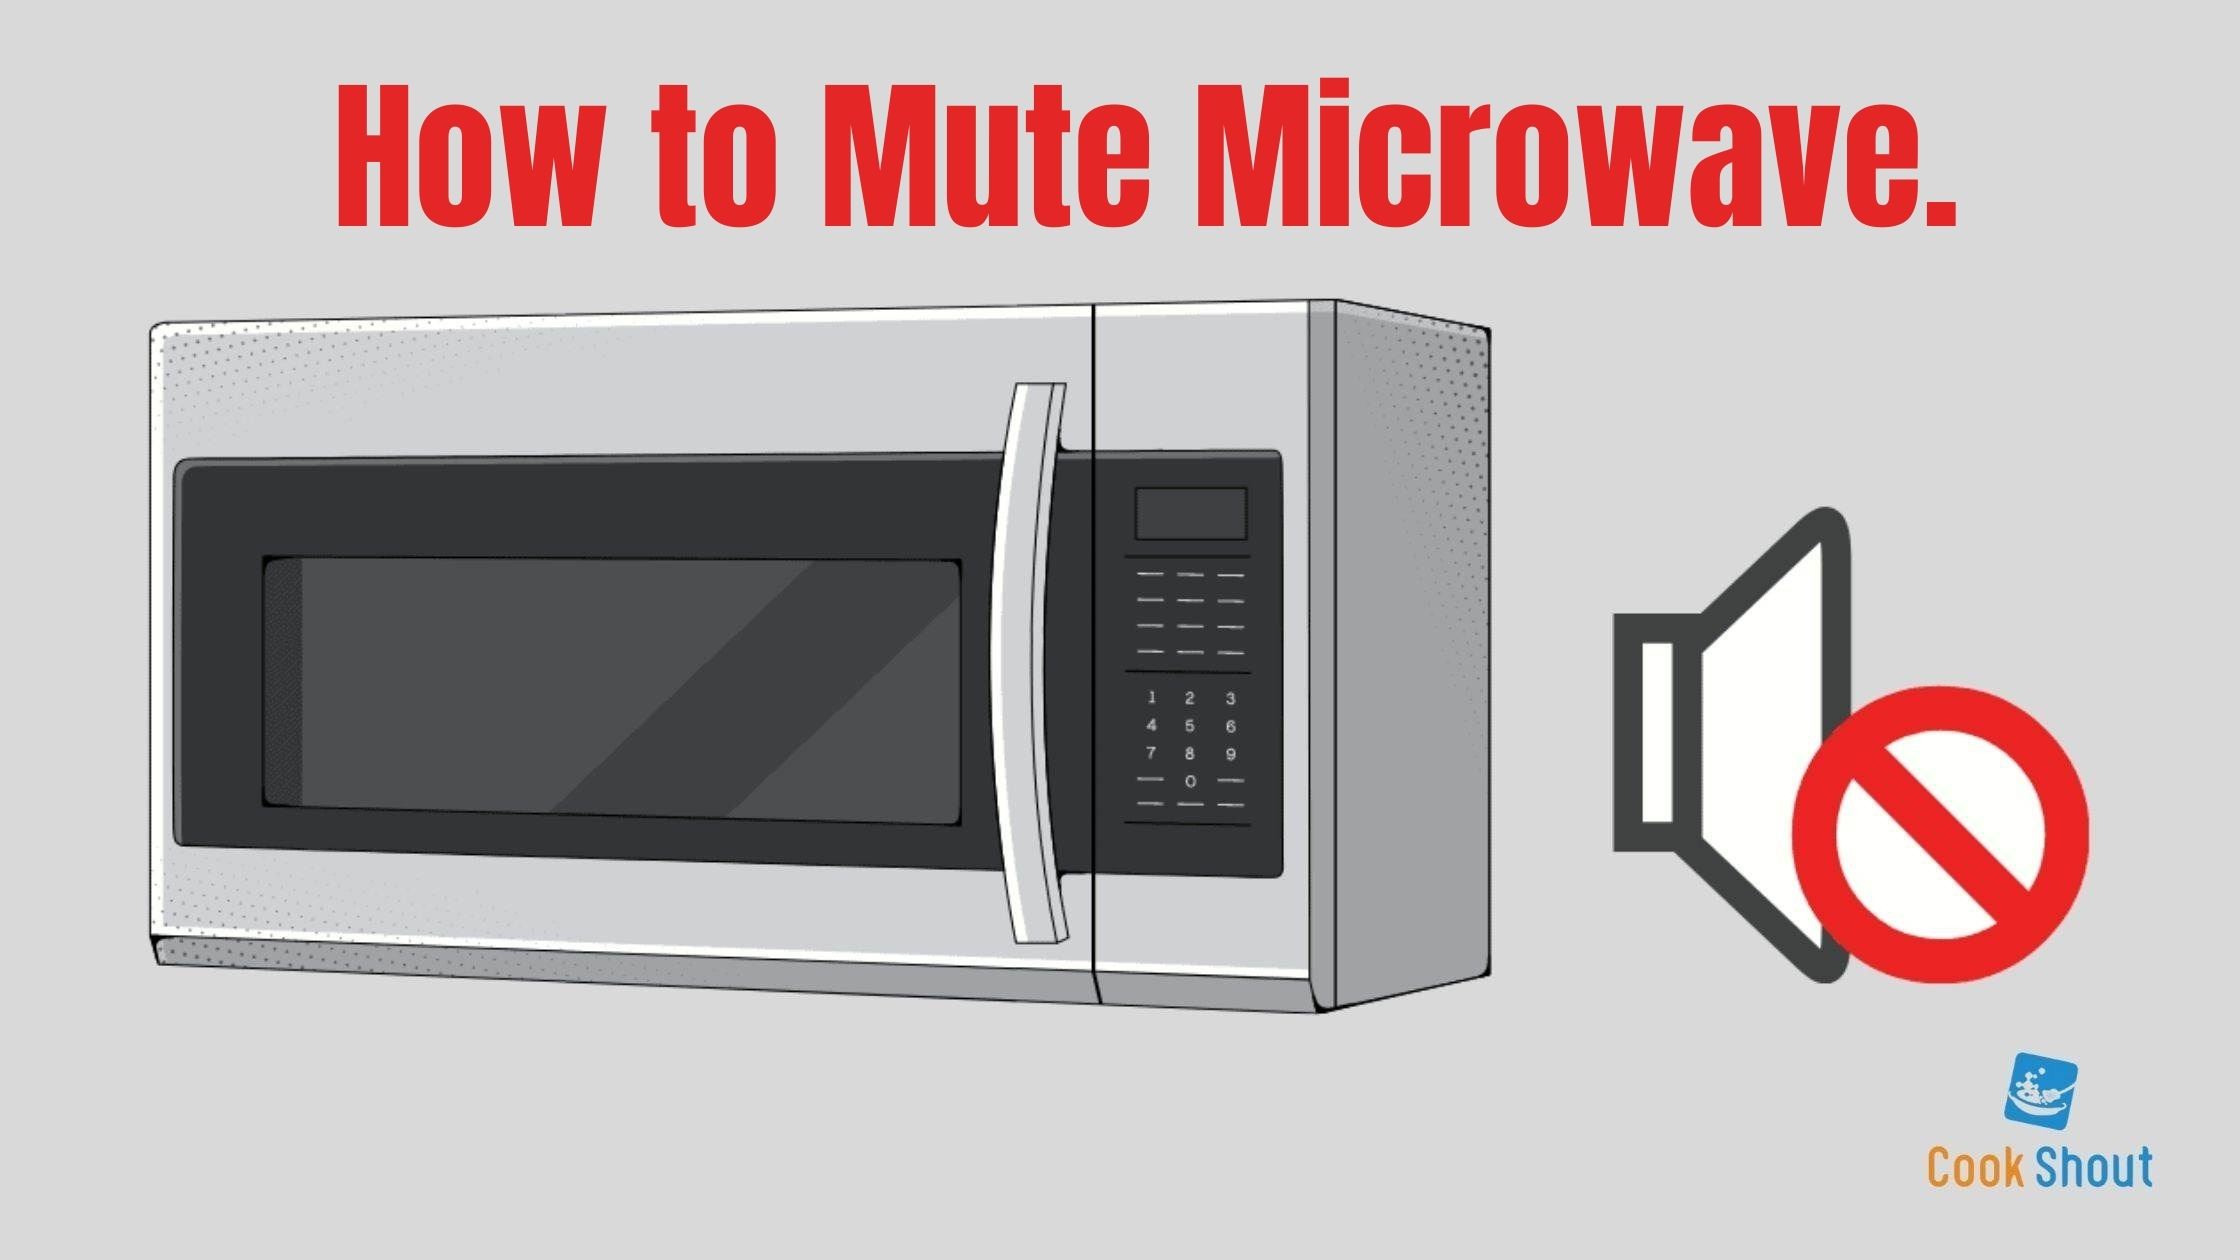 How to Mute Microwave.